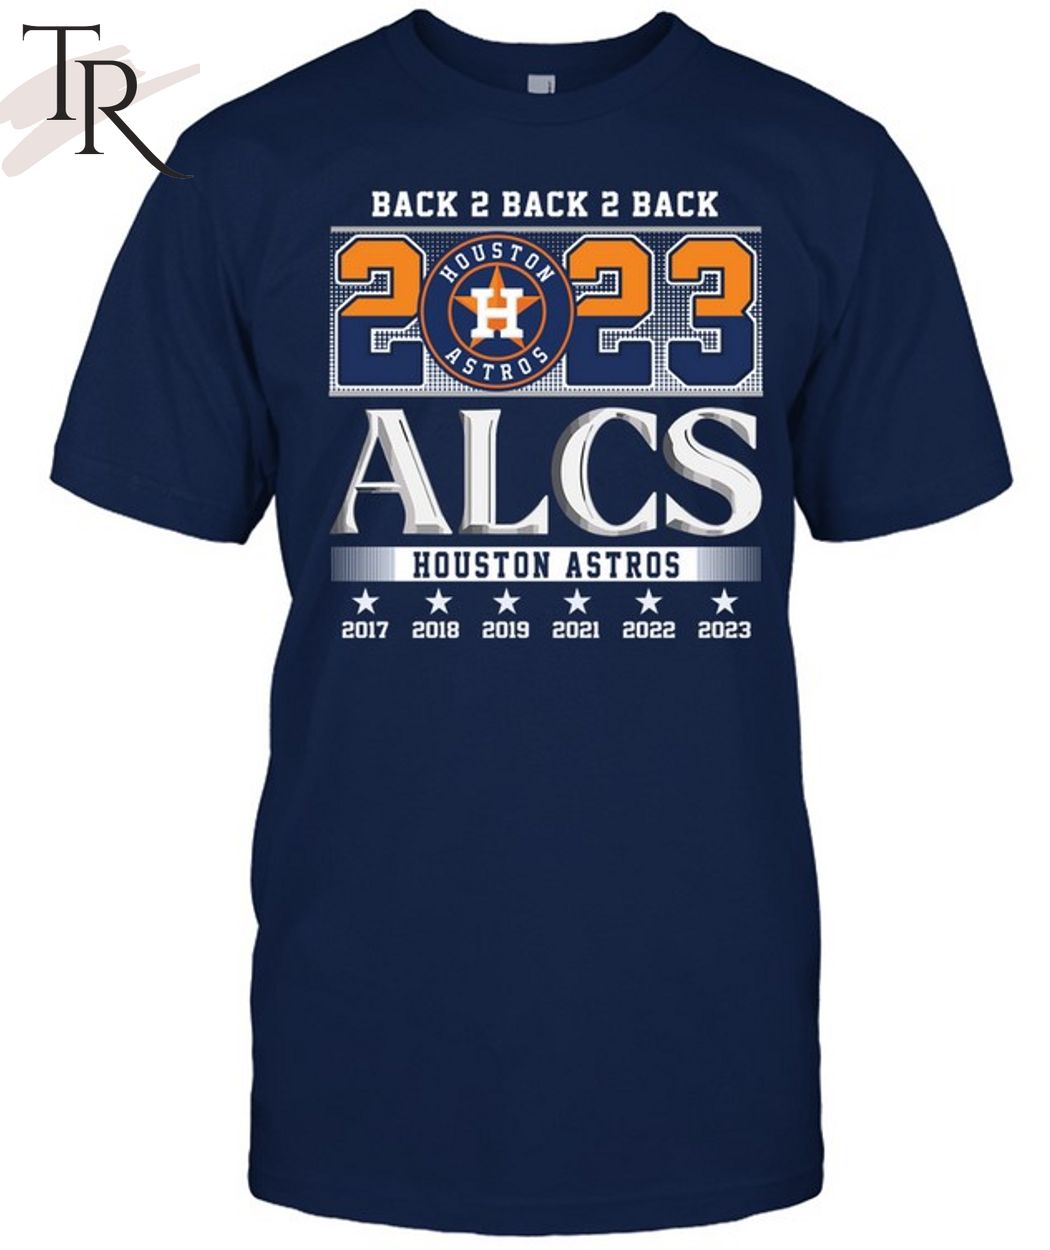 Houston Astros American League championship shirts, hats: Where to